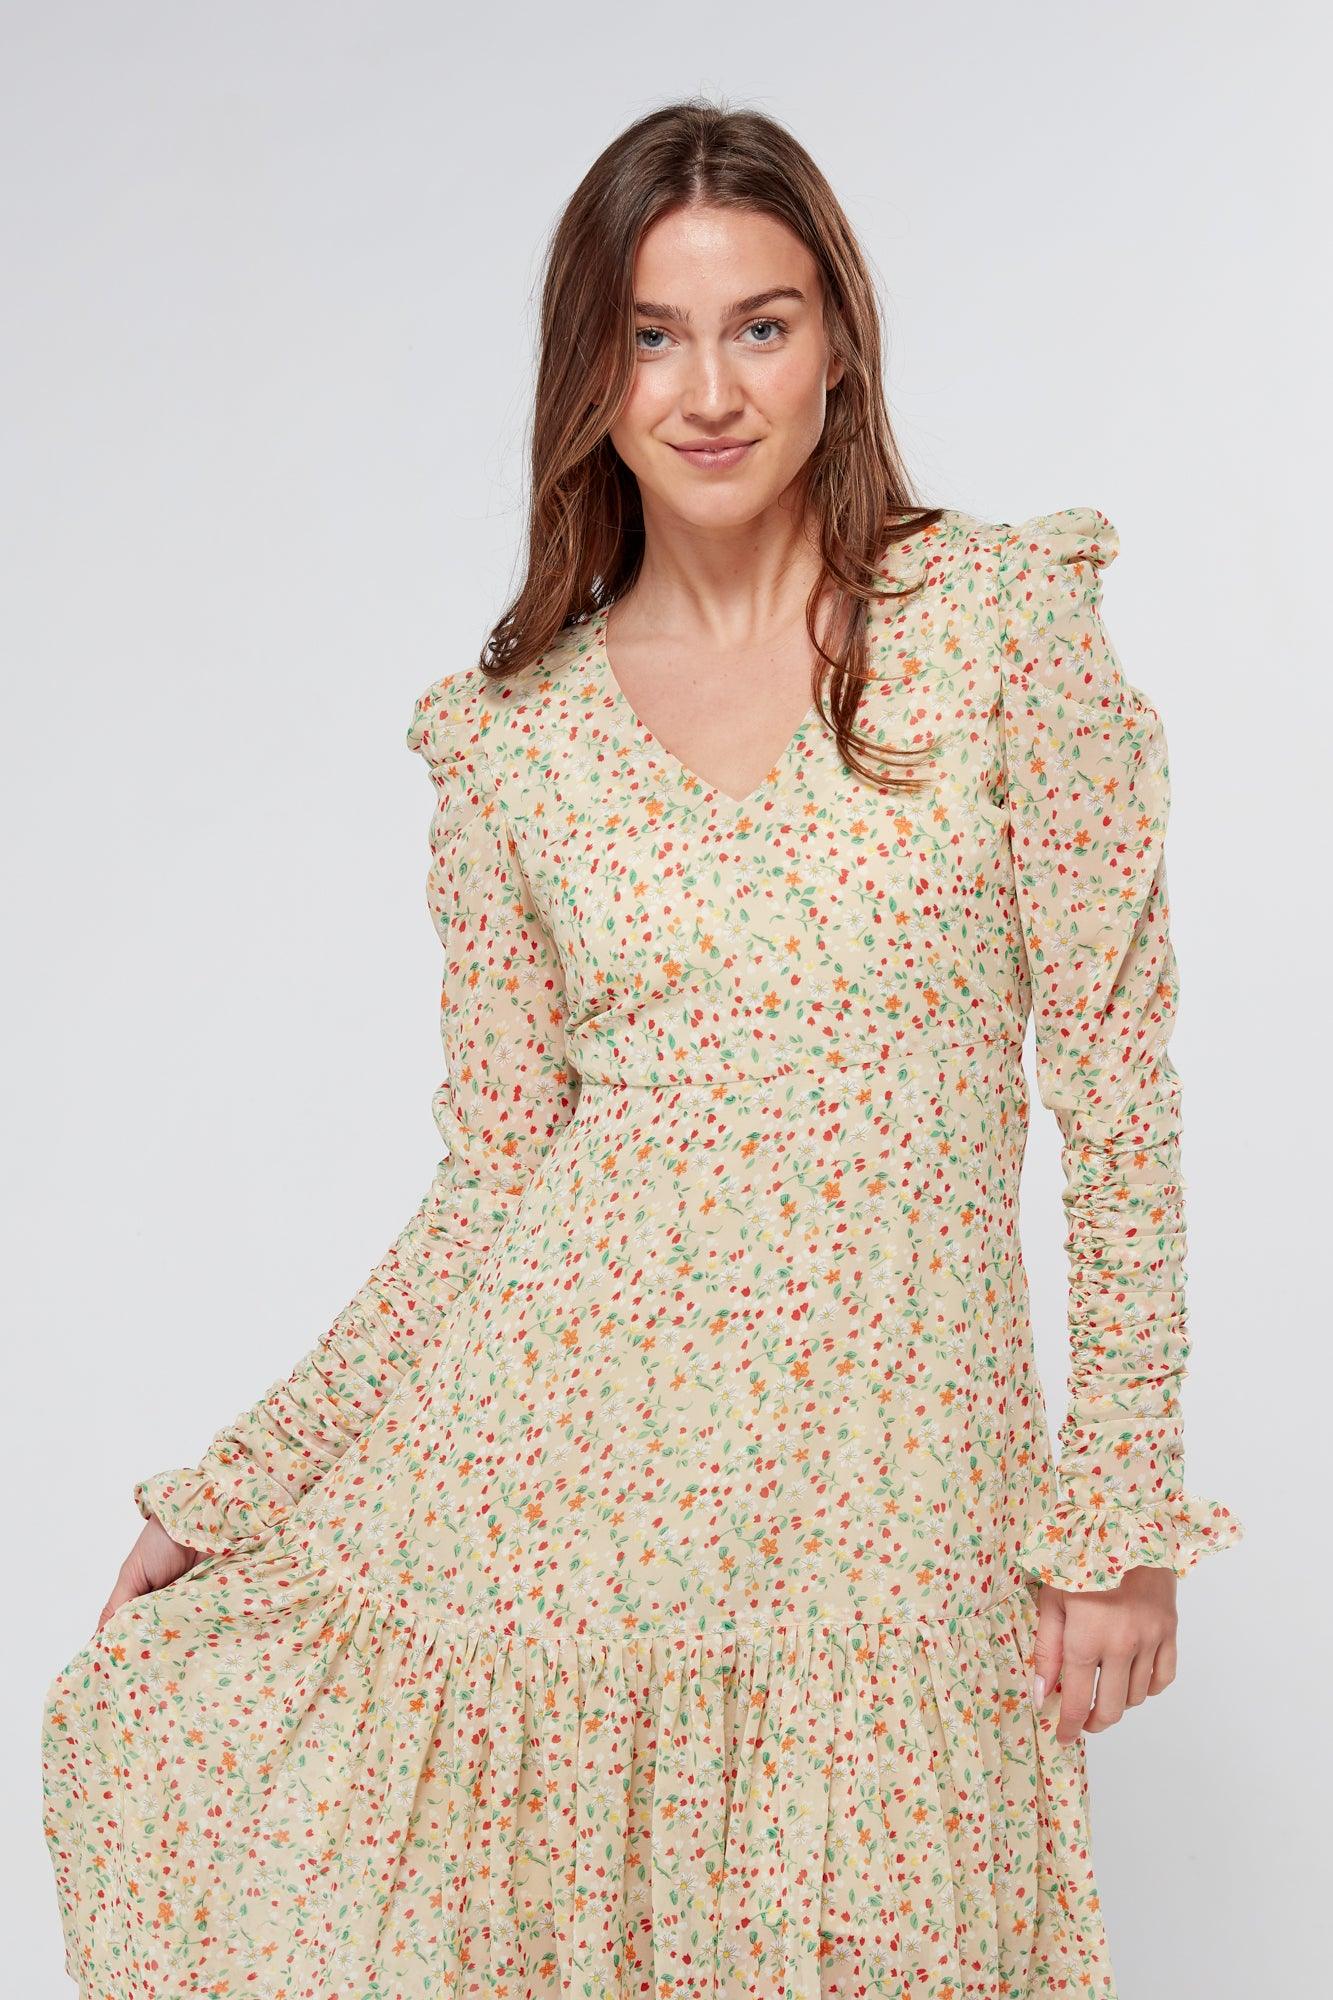 Introducing our Georgette beige floral midi dress, the perfect addition to your wardrobe for any special occasion. The dress features a stunning floral print on a beige georgette fabric that flows beautifully into a big frill. The design is nicely fitted on the waist and hips, creating a flattering silhouette, and then flowing into a frill for a feminine touch.